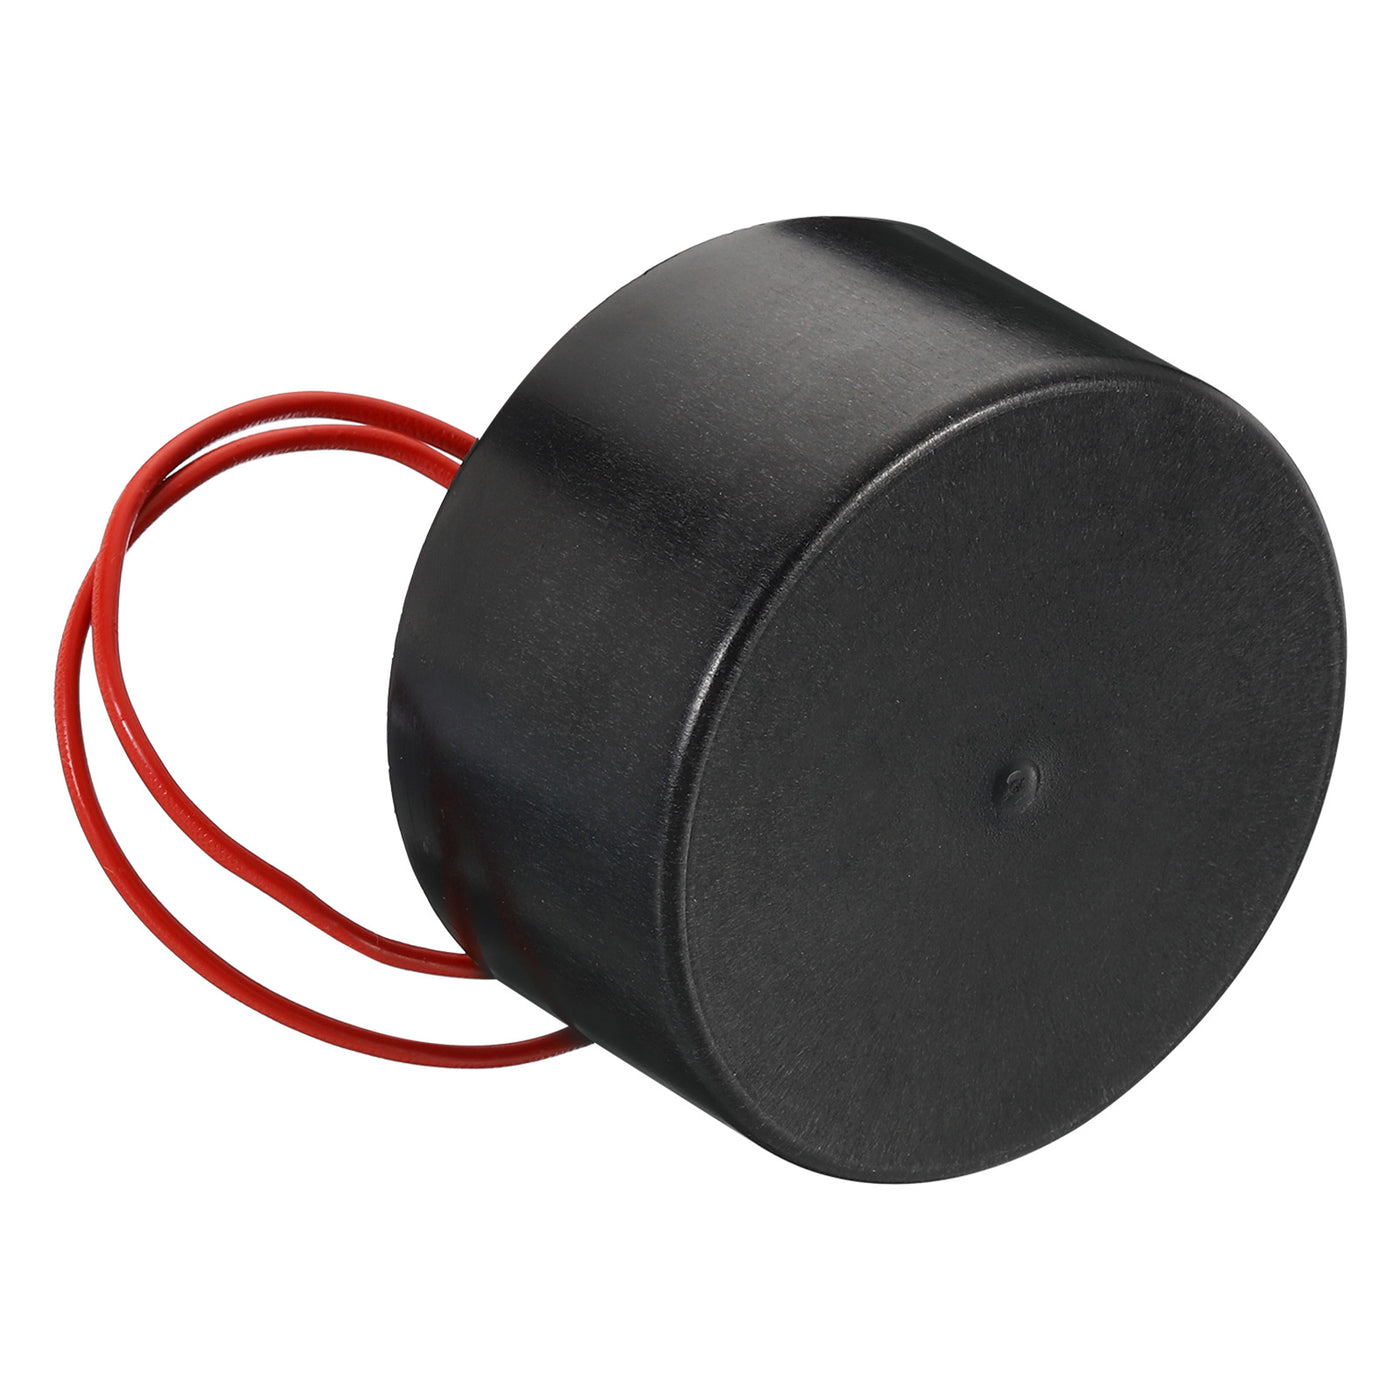 Harfington CBB60 35uf Run Capacitor,2Pcs AC450V 50/60Hz with 2 Red Wires 17cm for Water Pump